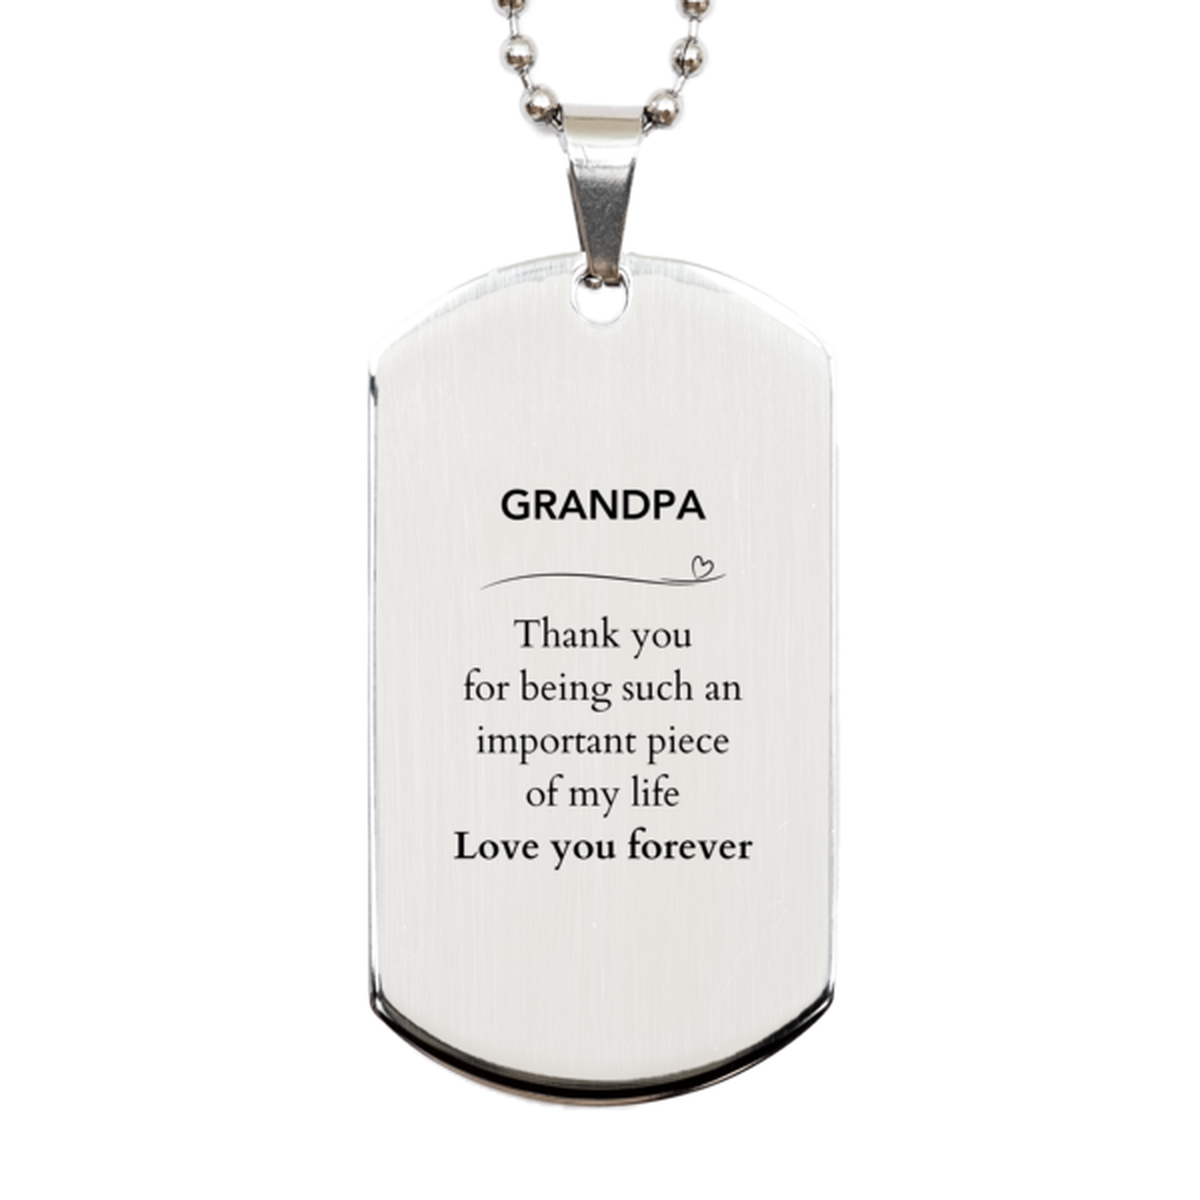 Appropriate Grandpa Silver Dog Tag Epic Birthday Gifts for Grandpa Thank you for being such an important piece of my life Grandpa Christmas Mothers Fathers Day